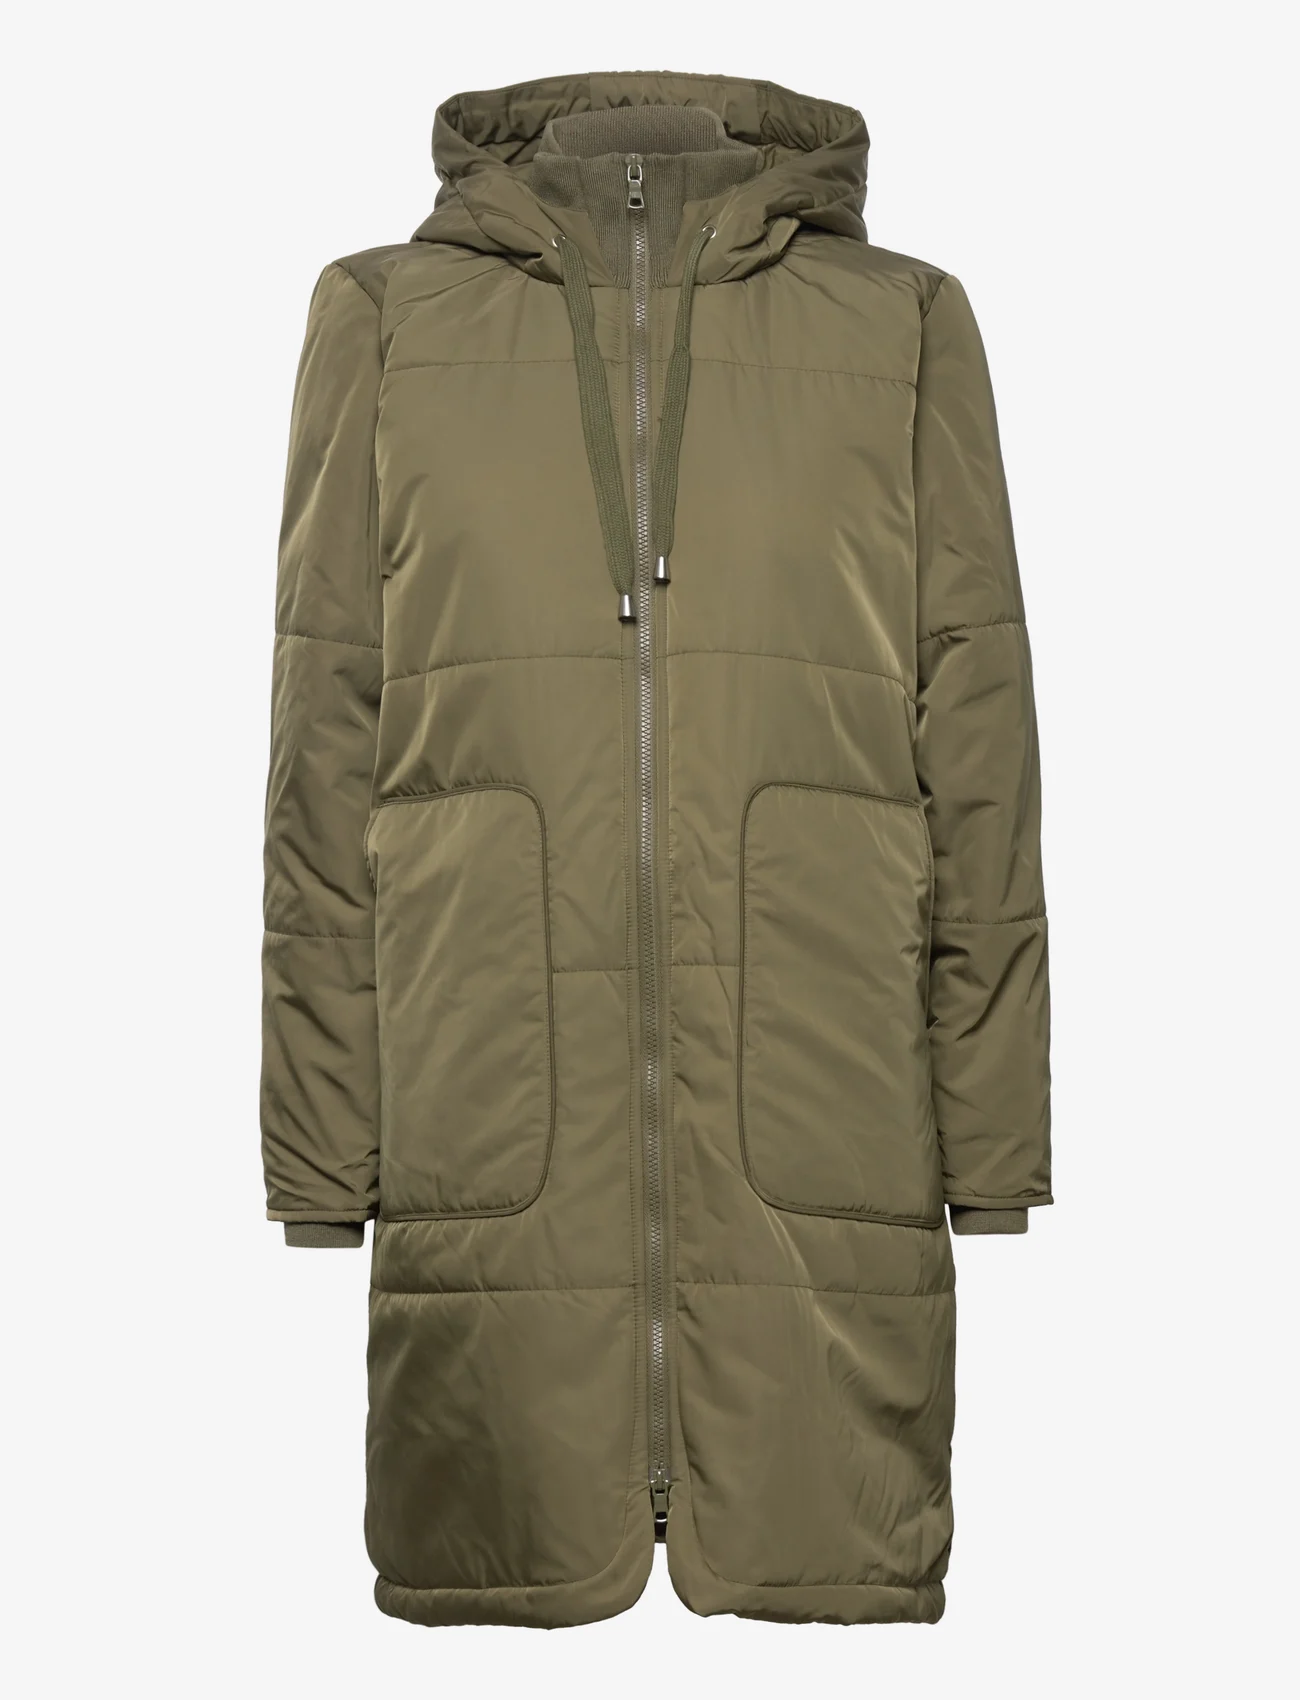 Sofie Schnoor - Jacket - talvejoped - army green - 0